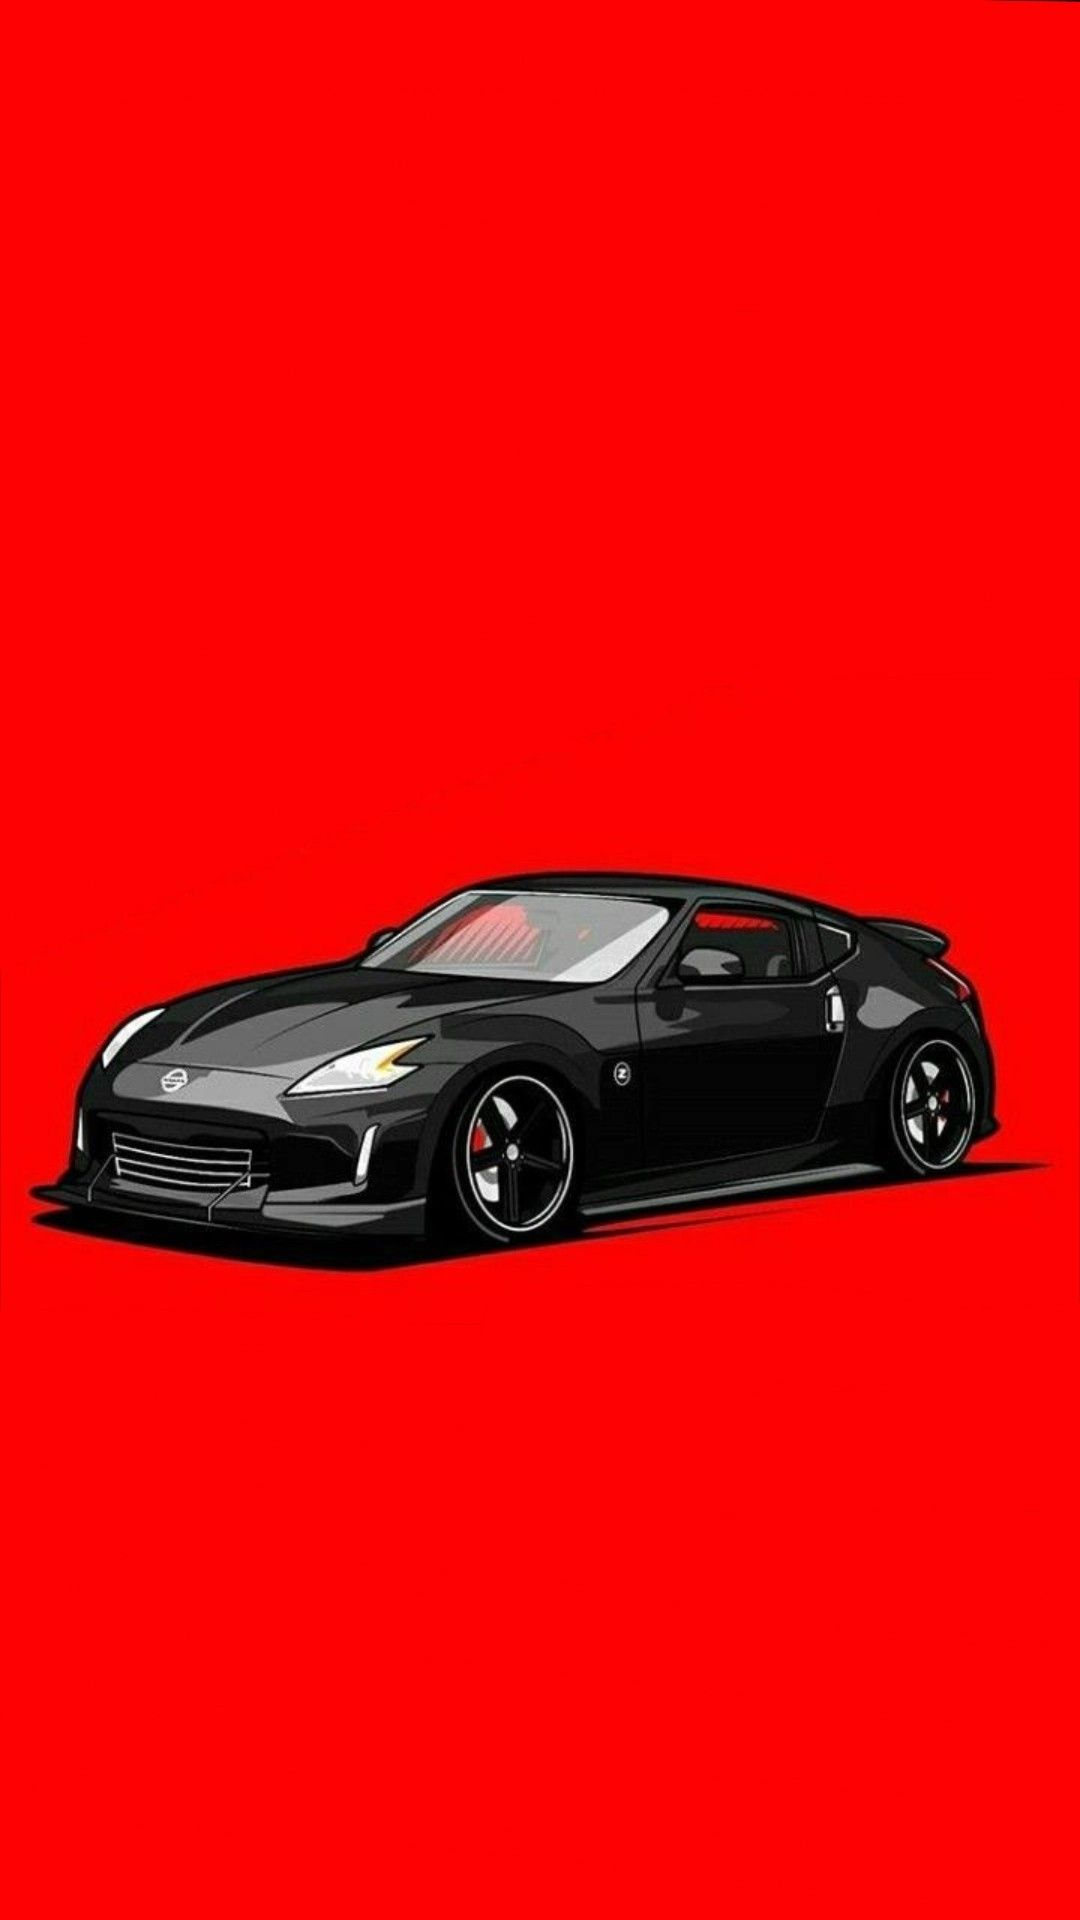 1080x1920 Pin by Harm Tol on Cars and Bikes | New car wallpaper, Nissan 350z, Car iphone wallpaper